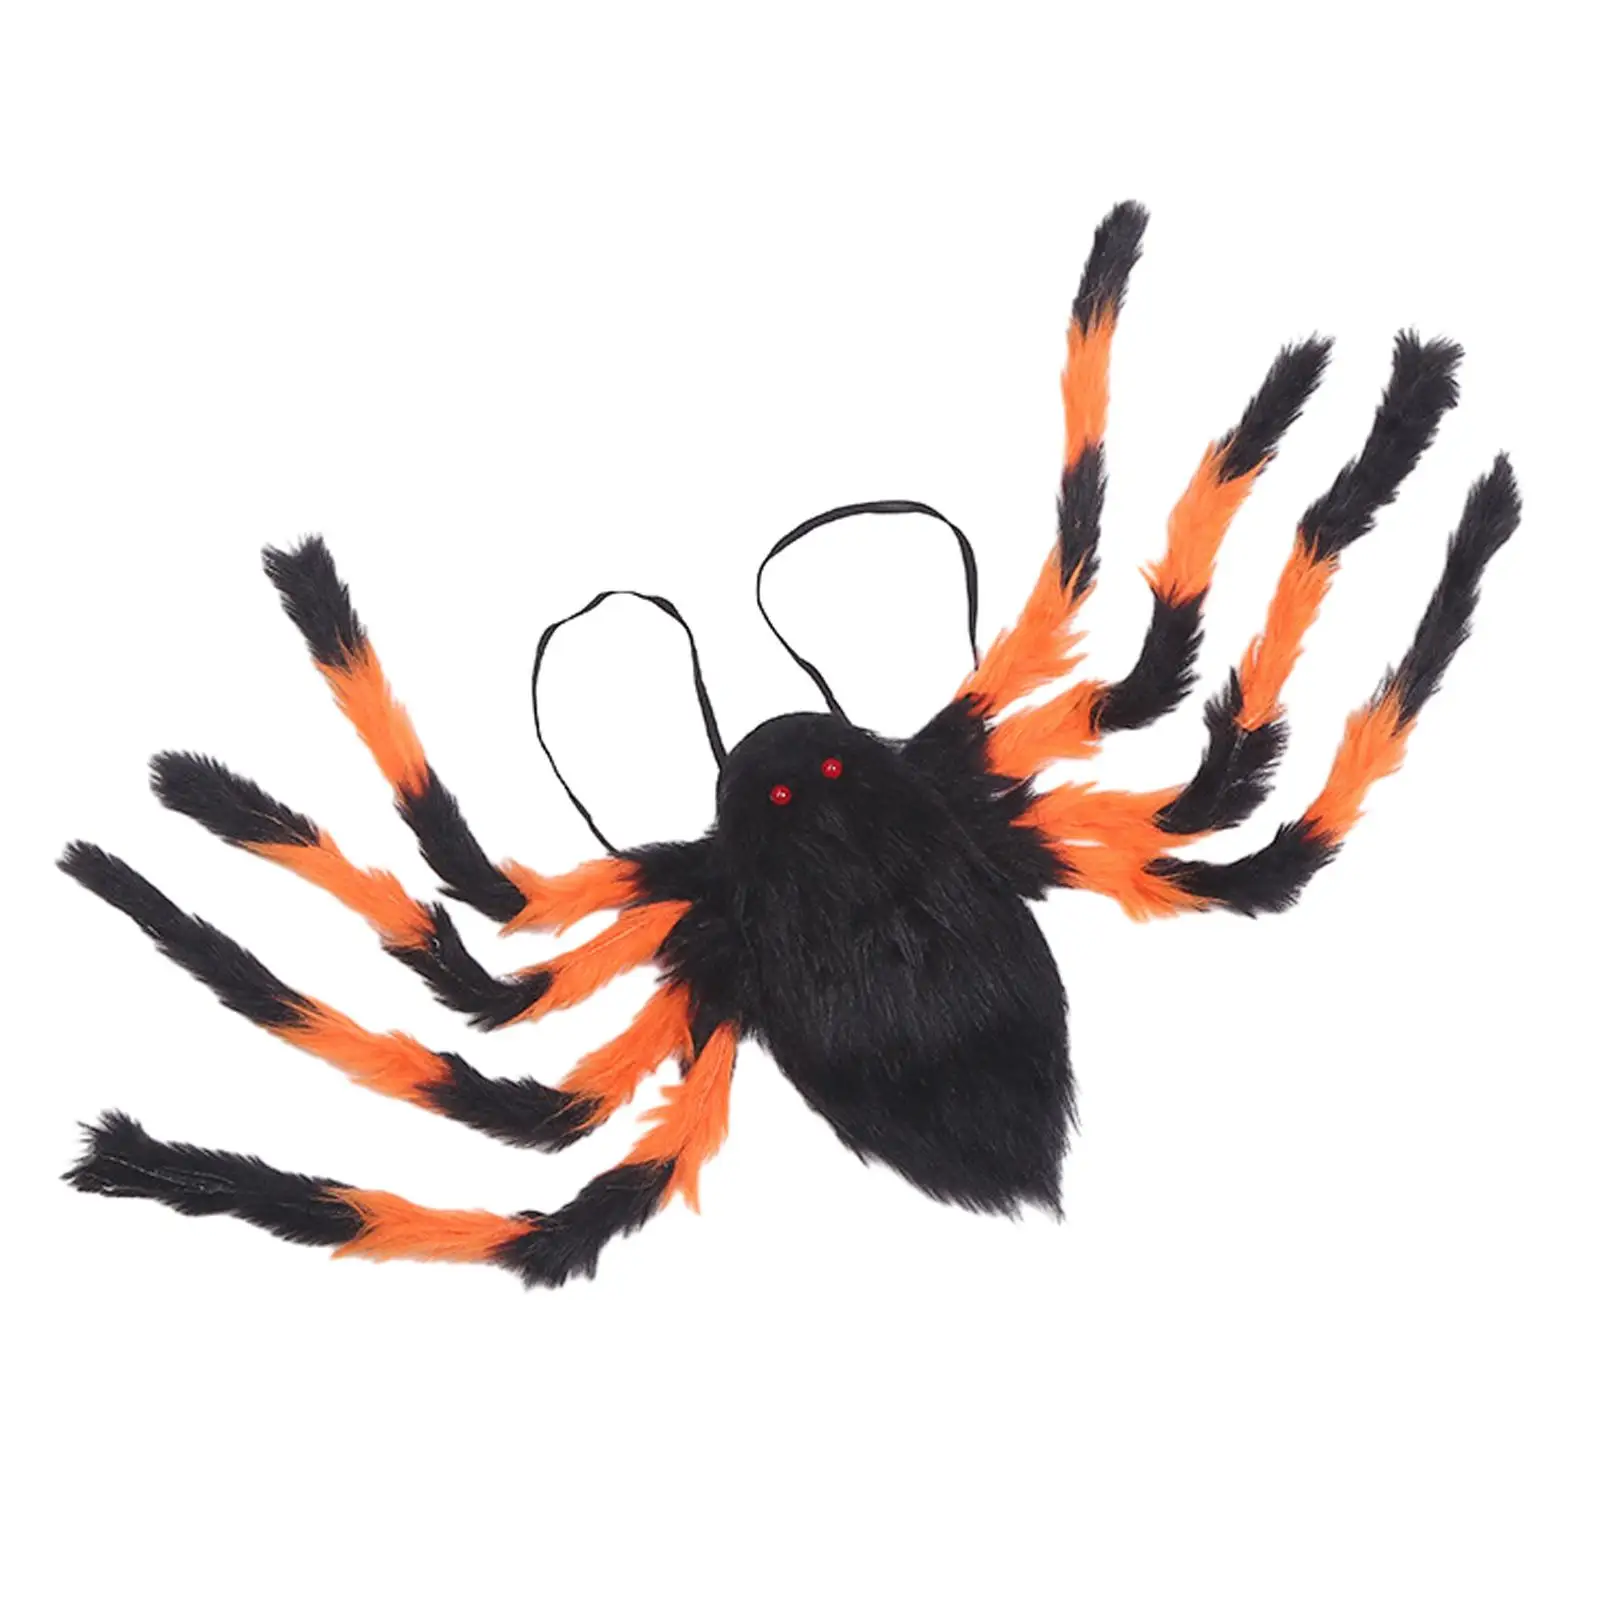 Halloween Spider Backpack Costume 8 Legs Horror Plush Spider Decoration for Adult Fancy Dress Taking Picture Cosplay Party